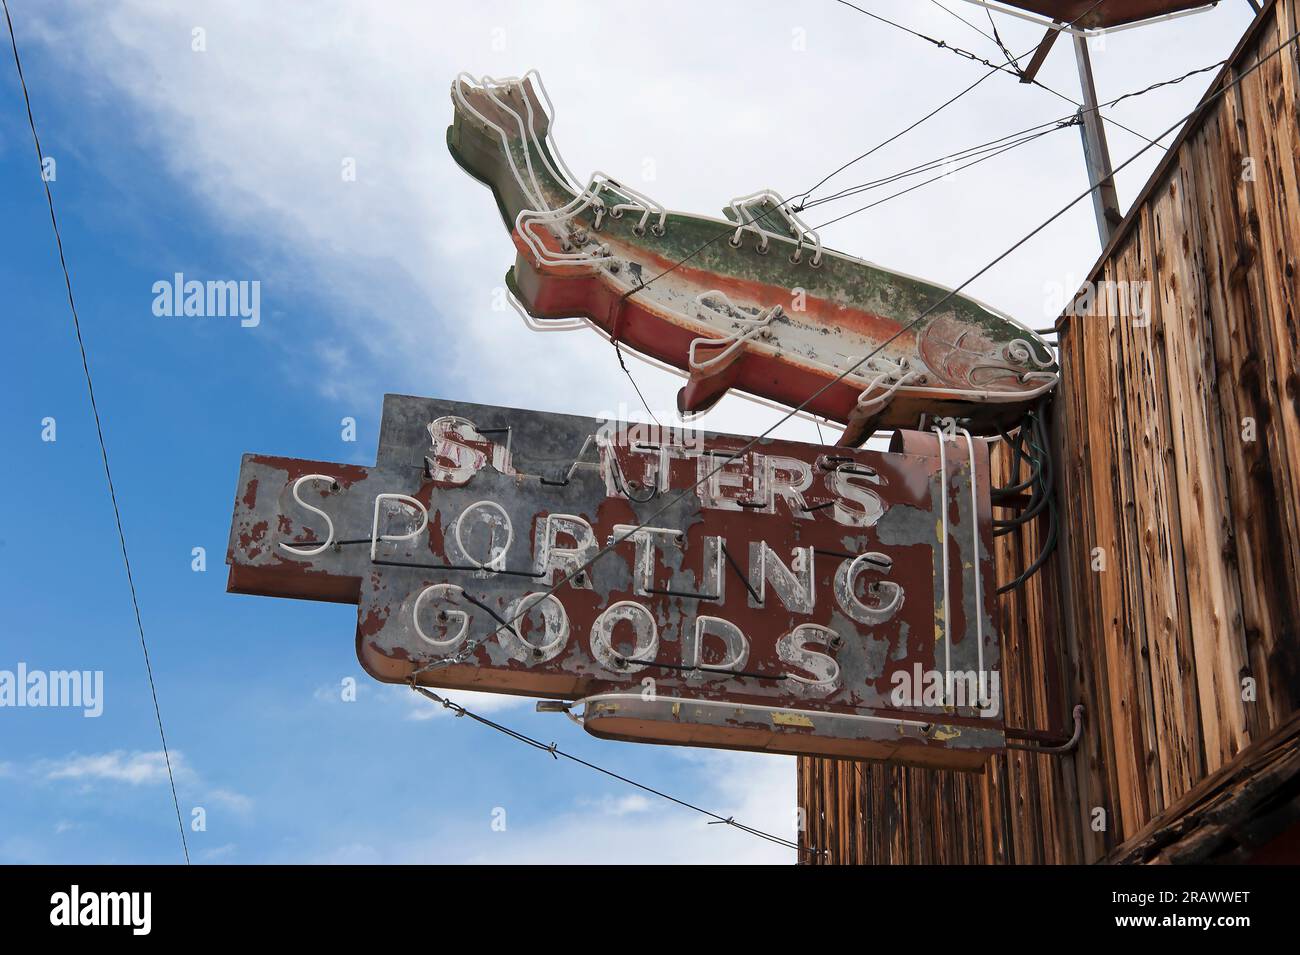 Roadside sign depicting a fish at Slater's Sporting Goods shop on Main Street in Lone Pine, California Stock Photo